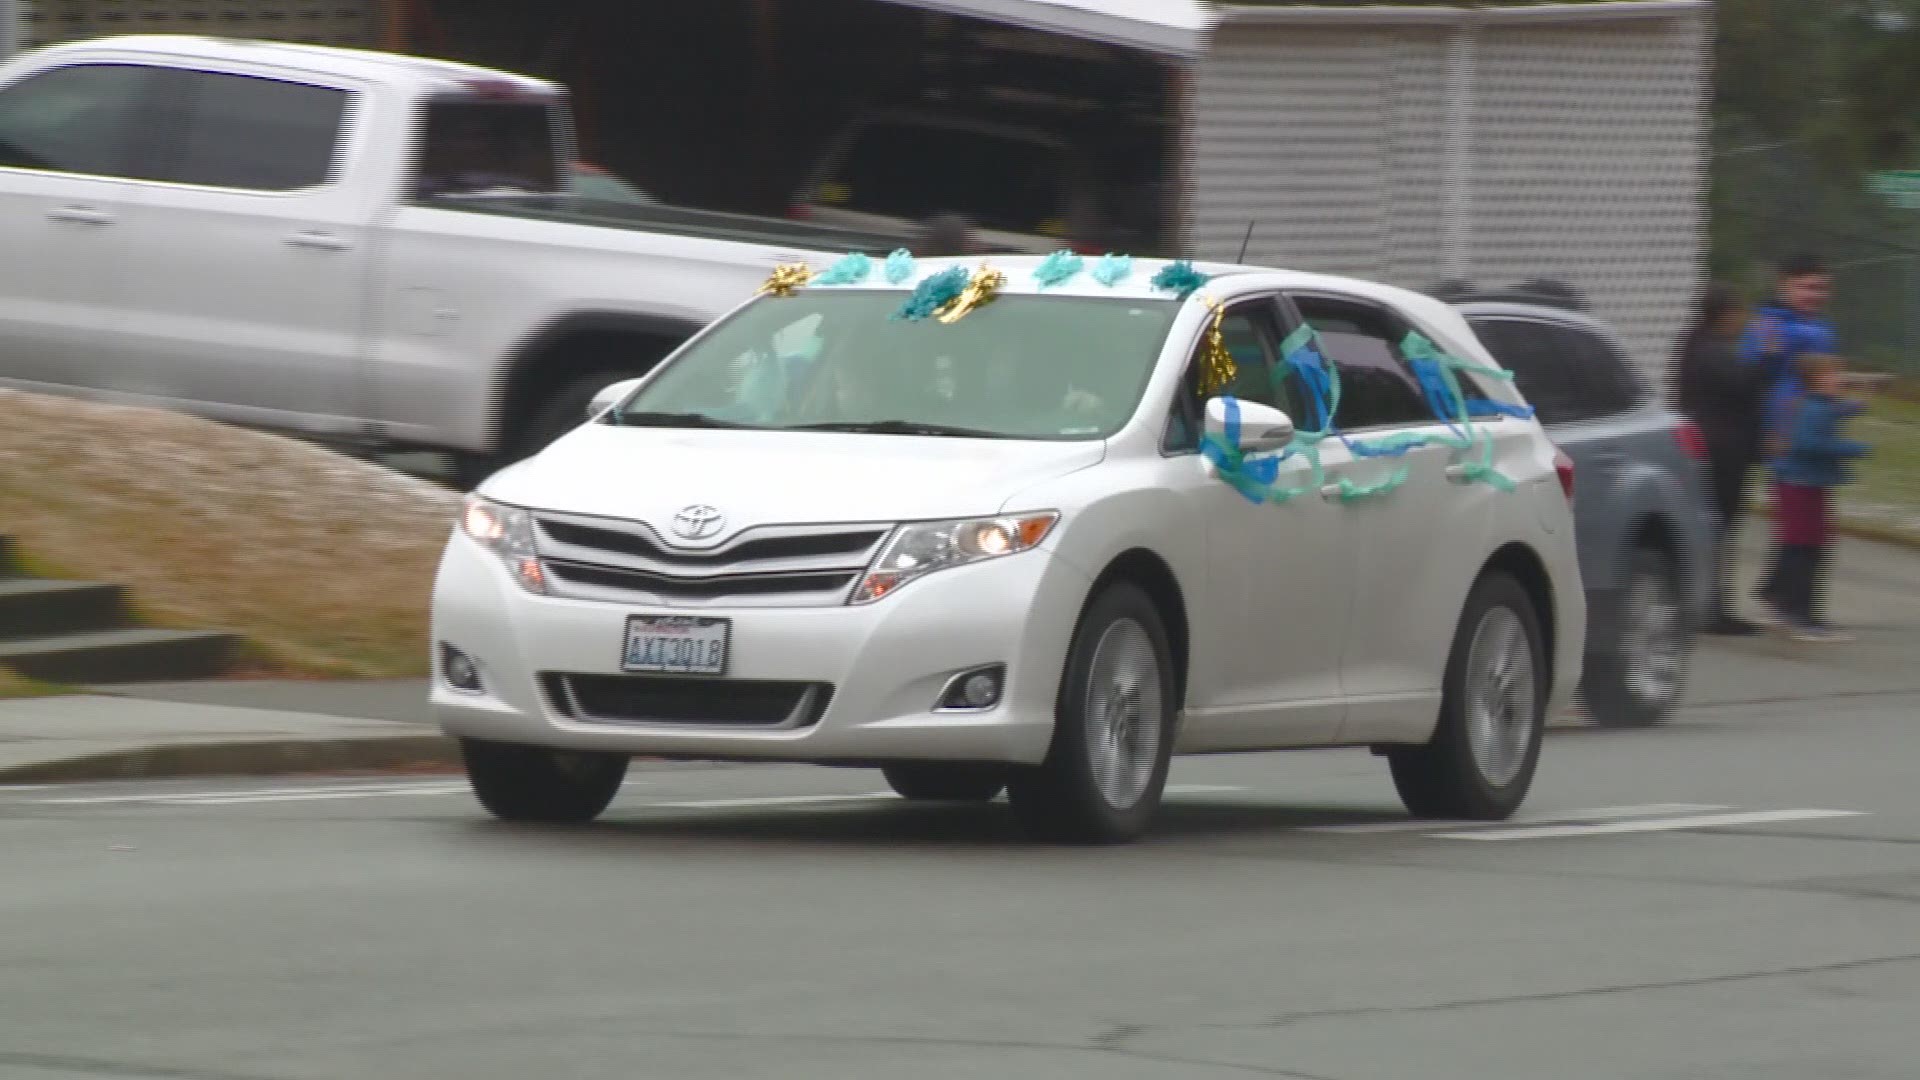 Teachers at Spokane's Indian Trial Elementary School held a car parade to say hi to students during the coronavirus shutdown.